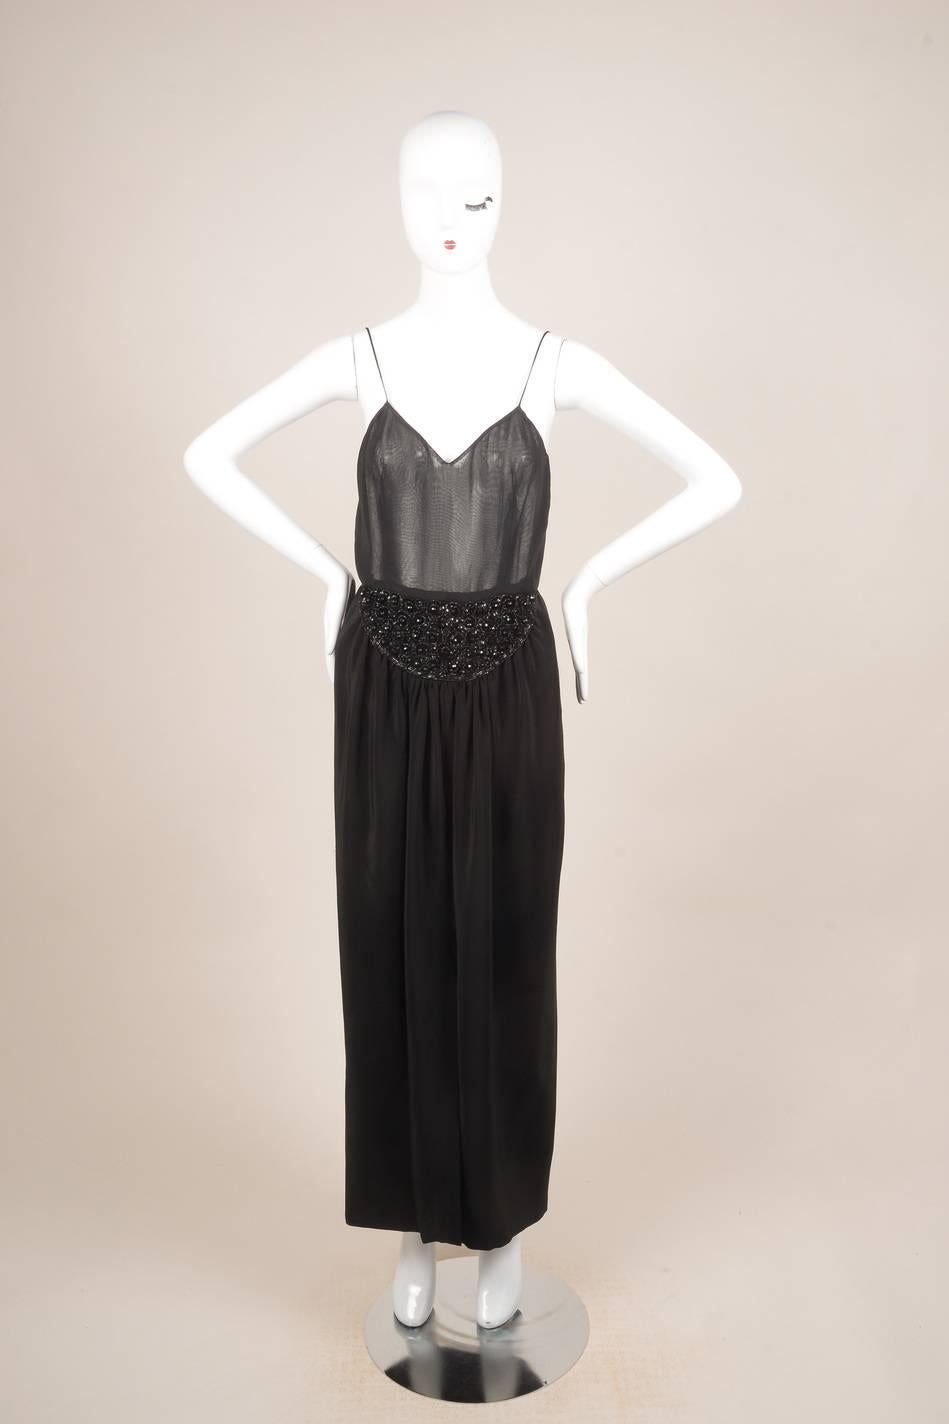 This embellished sleeveless dress features a v-neckline. Hits below knees.
Beaded embellishment on front skirt. Pleated skirt with a front slit. Hidden back zip closure with hook-and-eye closure. Sheer top. Partially lined

Additional